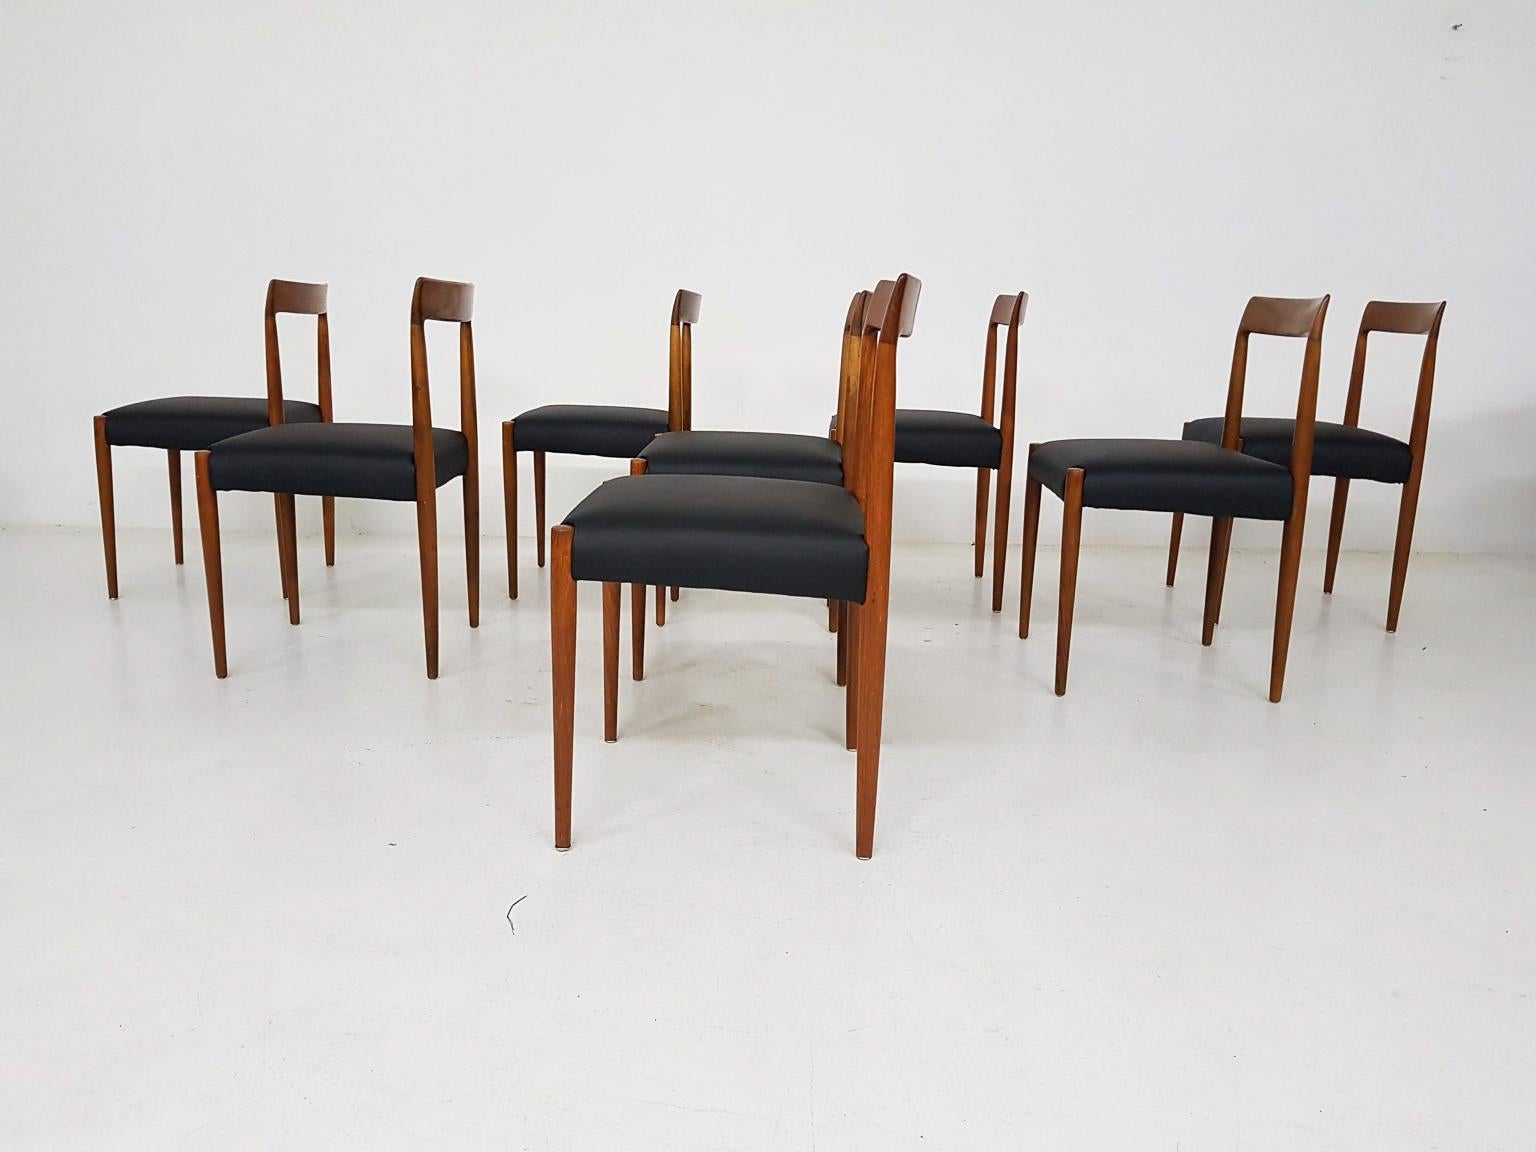 Scandinavian Modern Set of 8 Teak and Leather Dining Chairs by Lukbe, Germany, 1960s